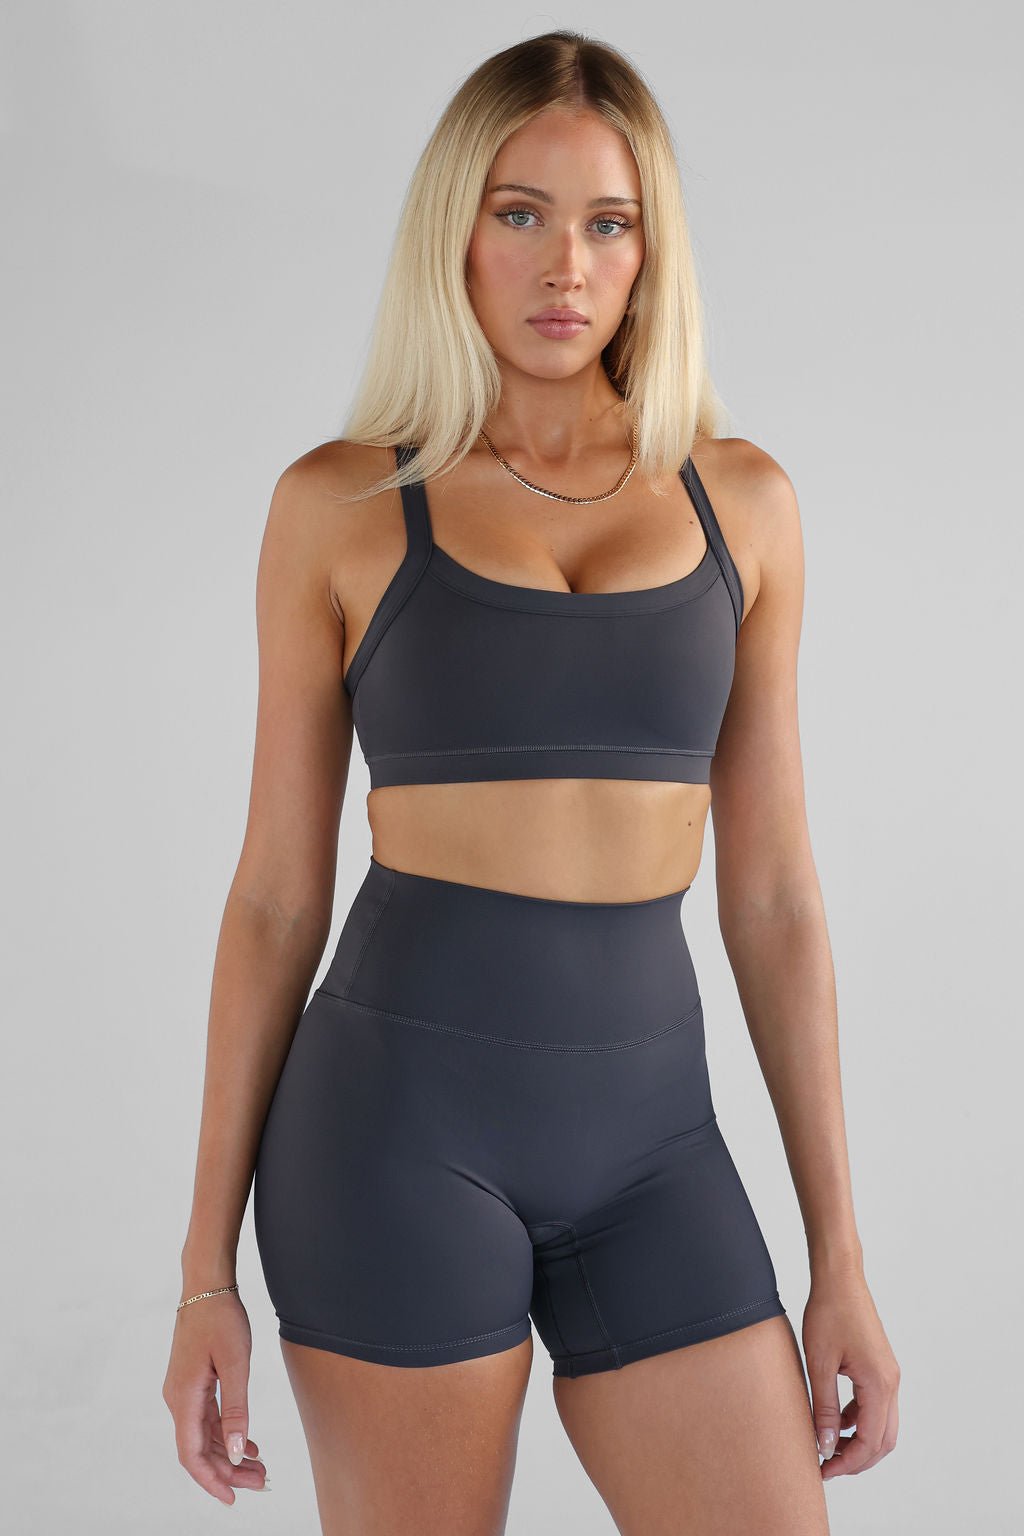 SCULPT Cross Back Crop - Ash SHIPPING FROM 12/02 - LEELO ACTIVE